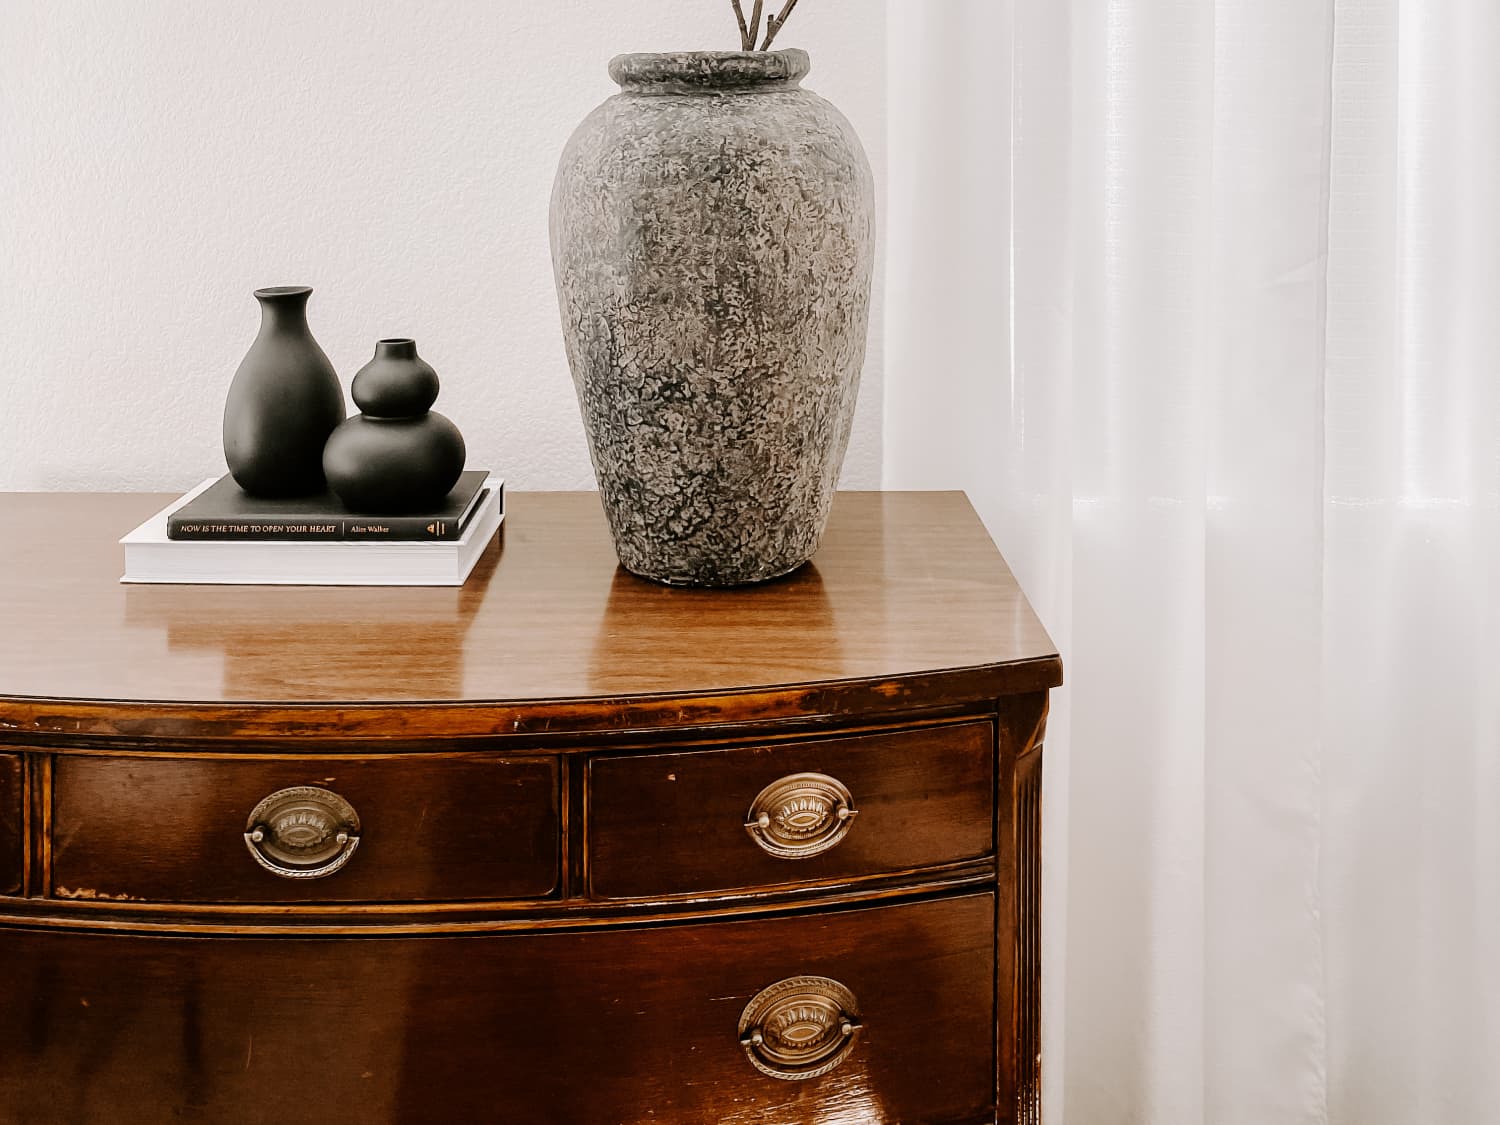 How To Turn An Old Pot Into An Artisian Stone Look * Hip & Humble Style